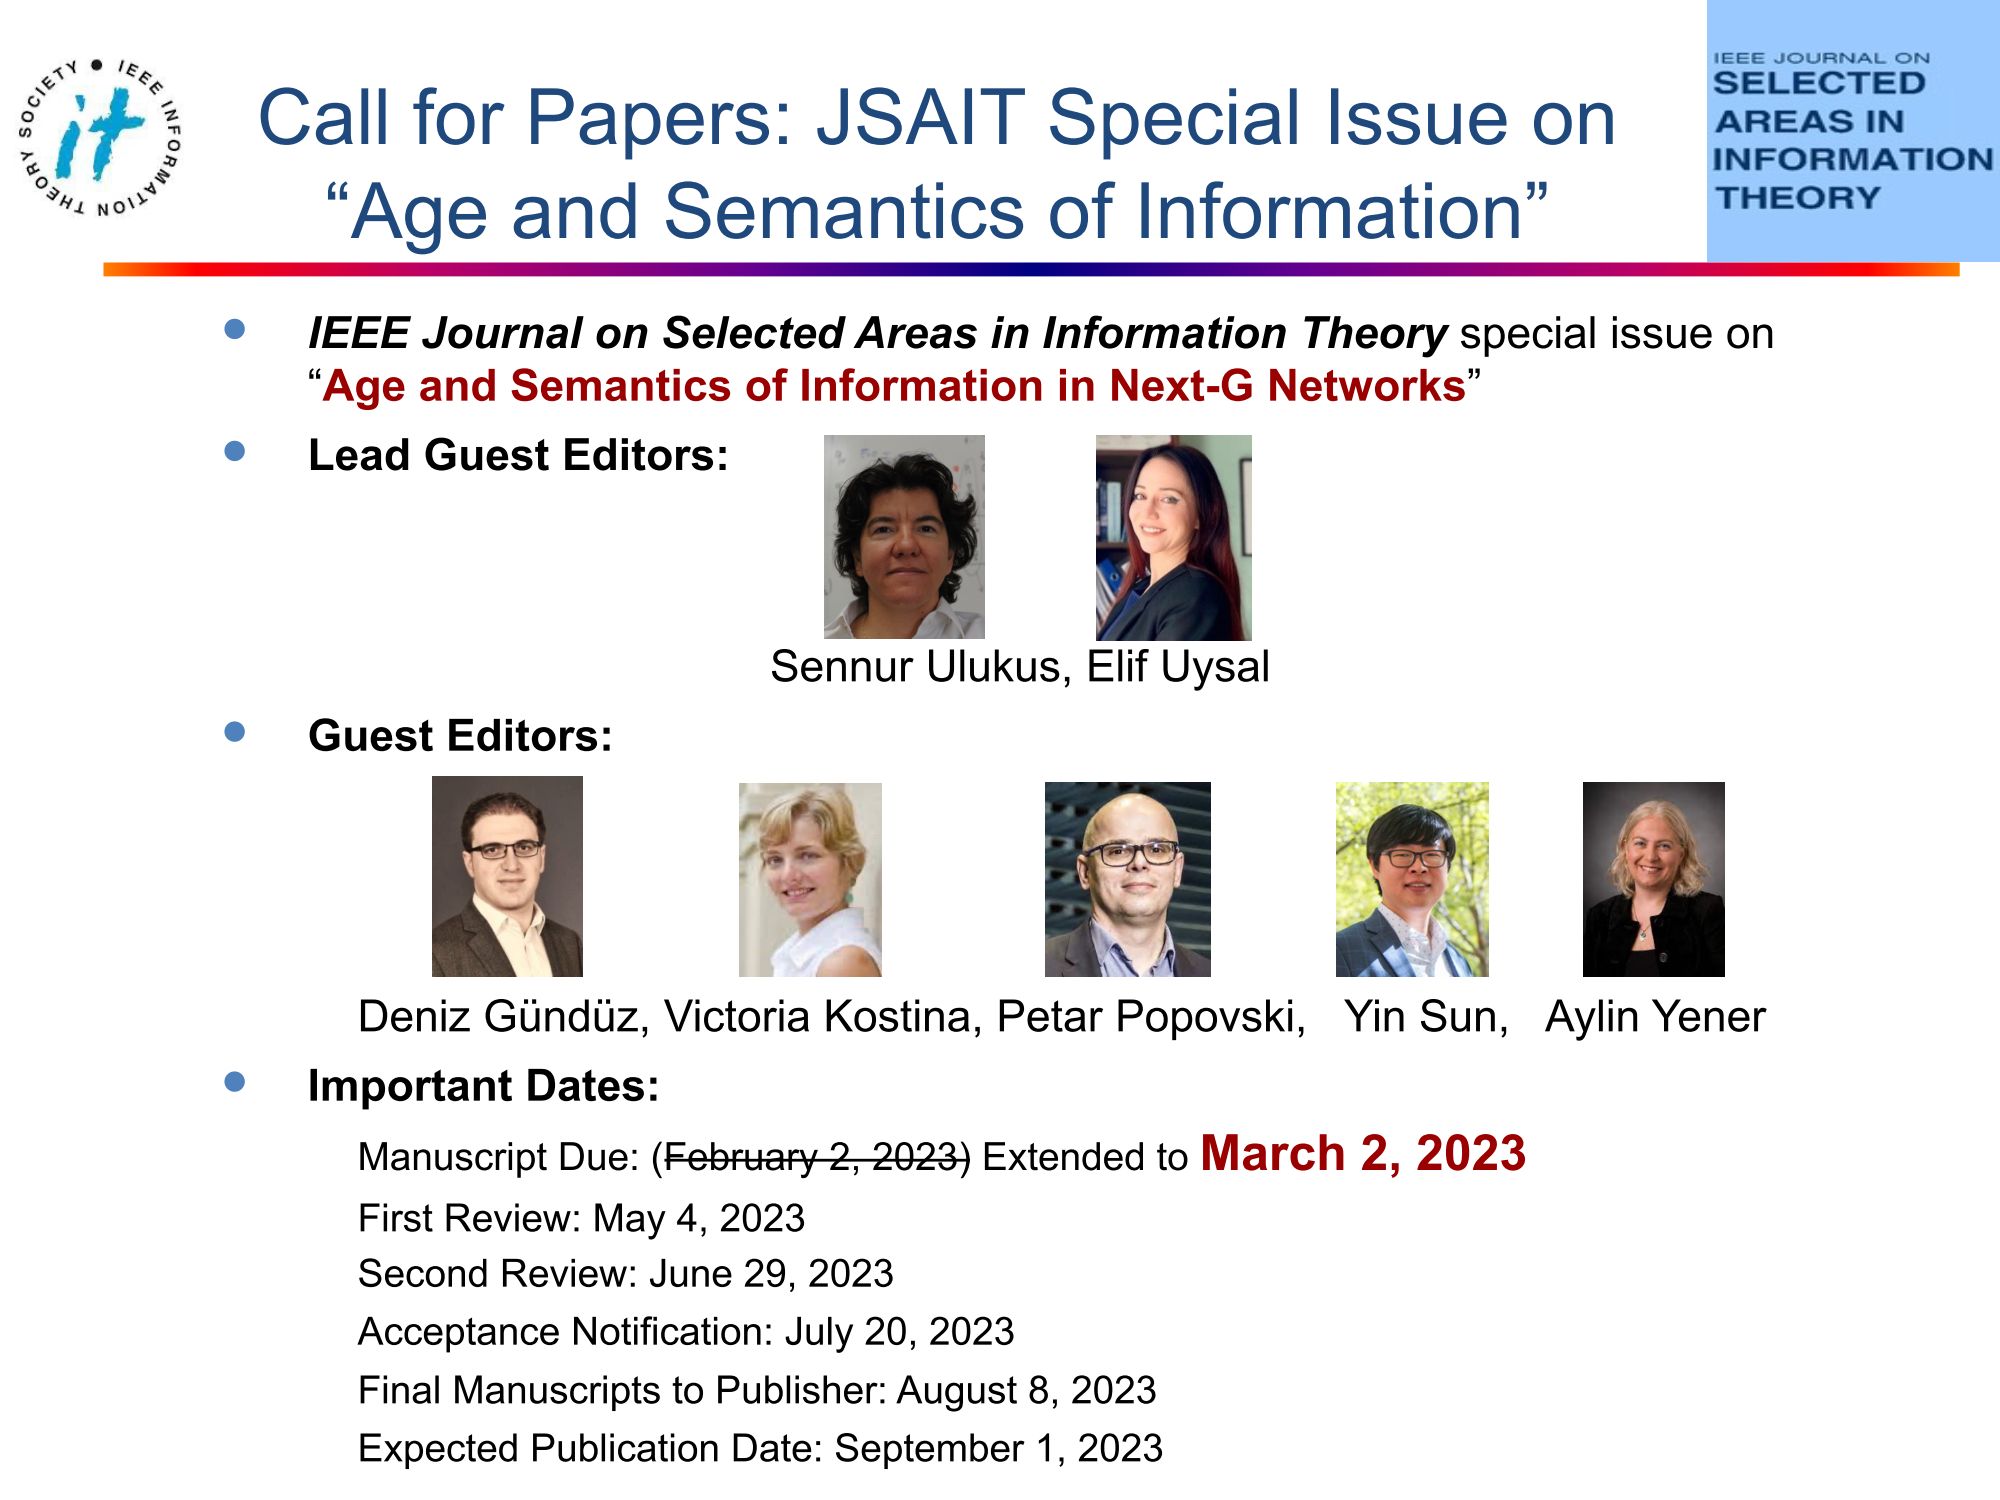 Call for Papers: JSAIT Special Issue on “Age and Semantics of Information”